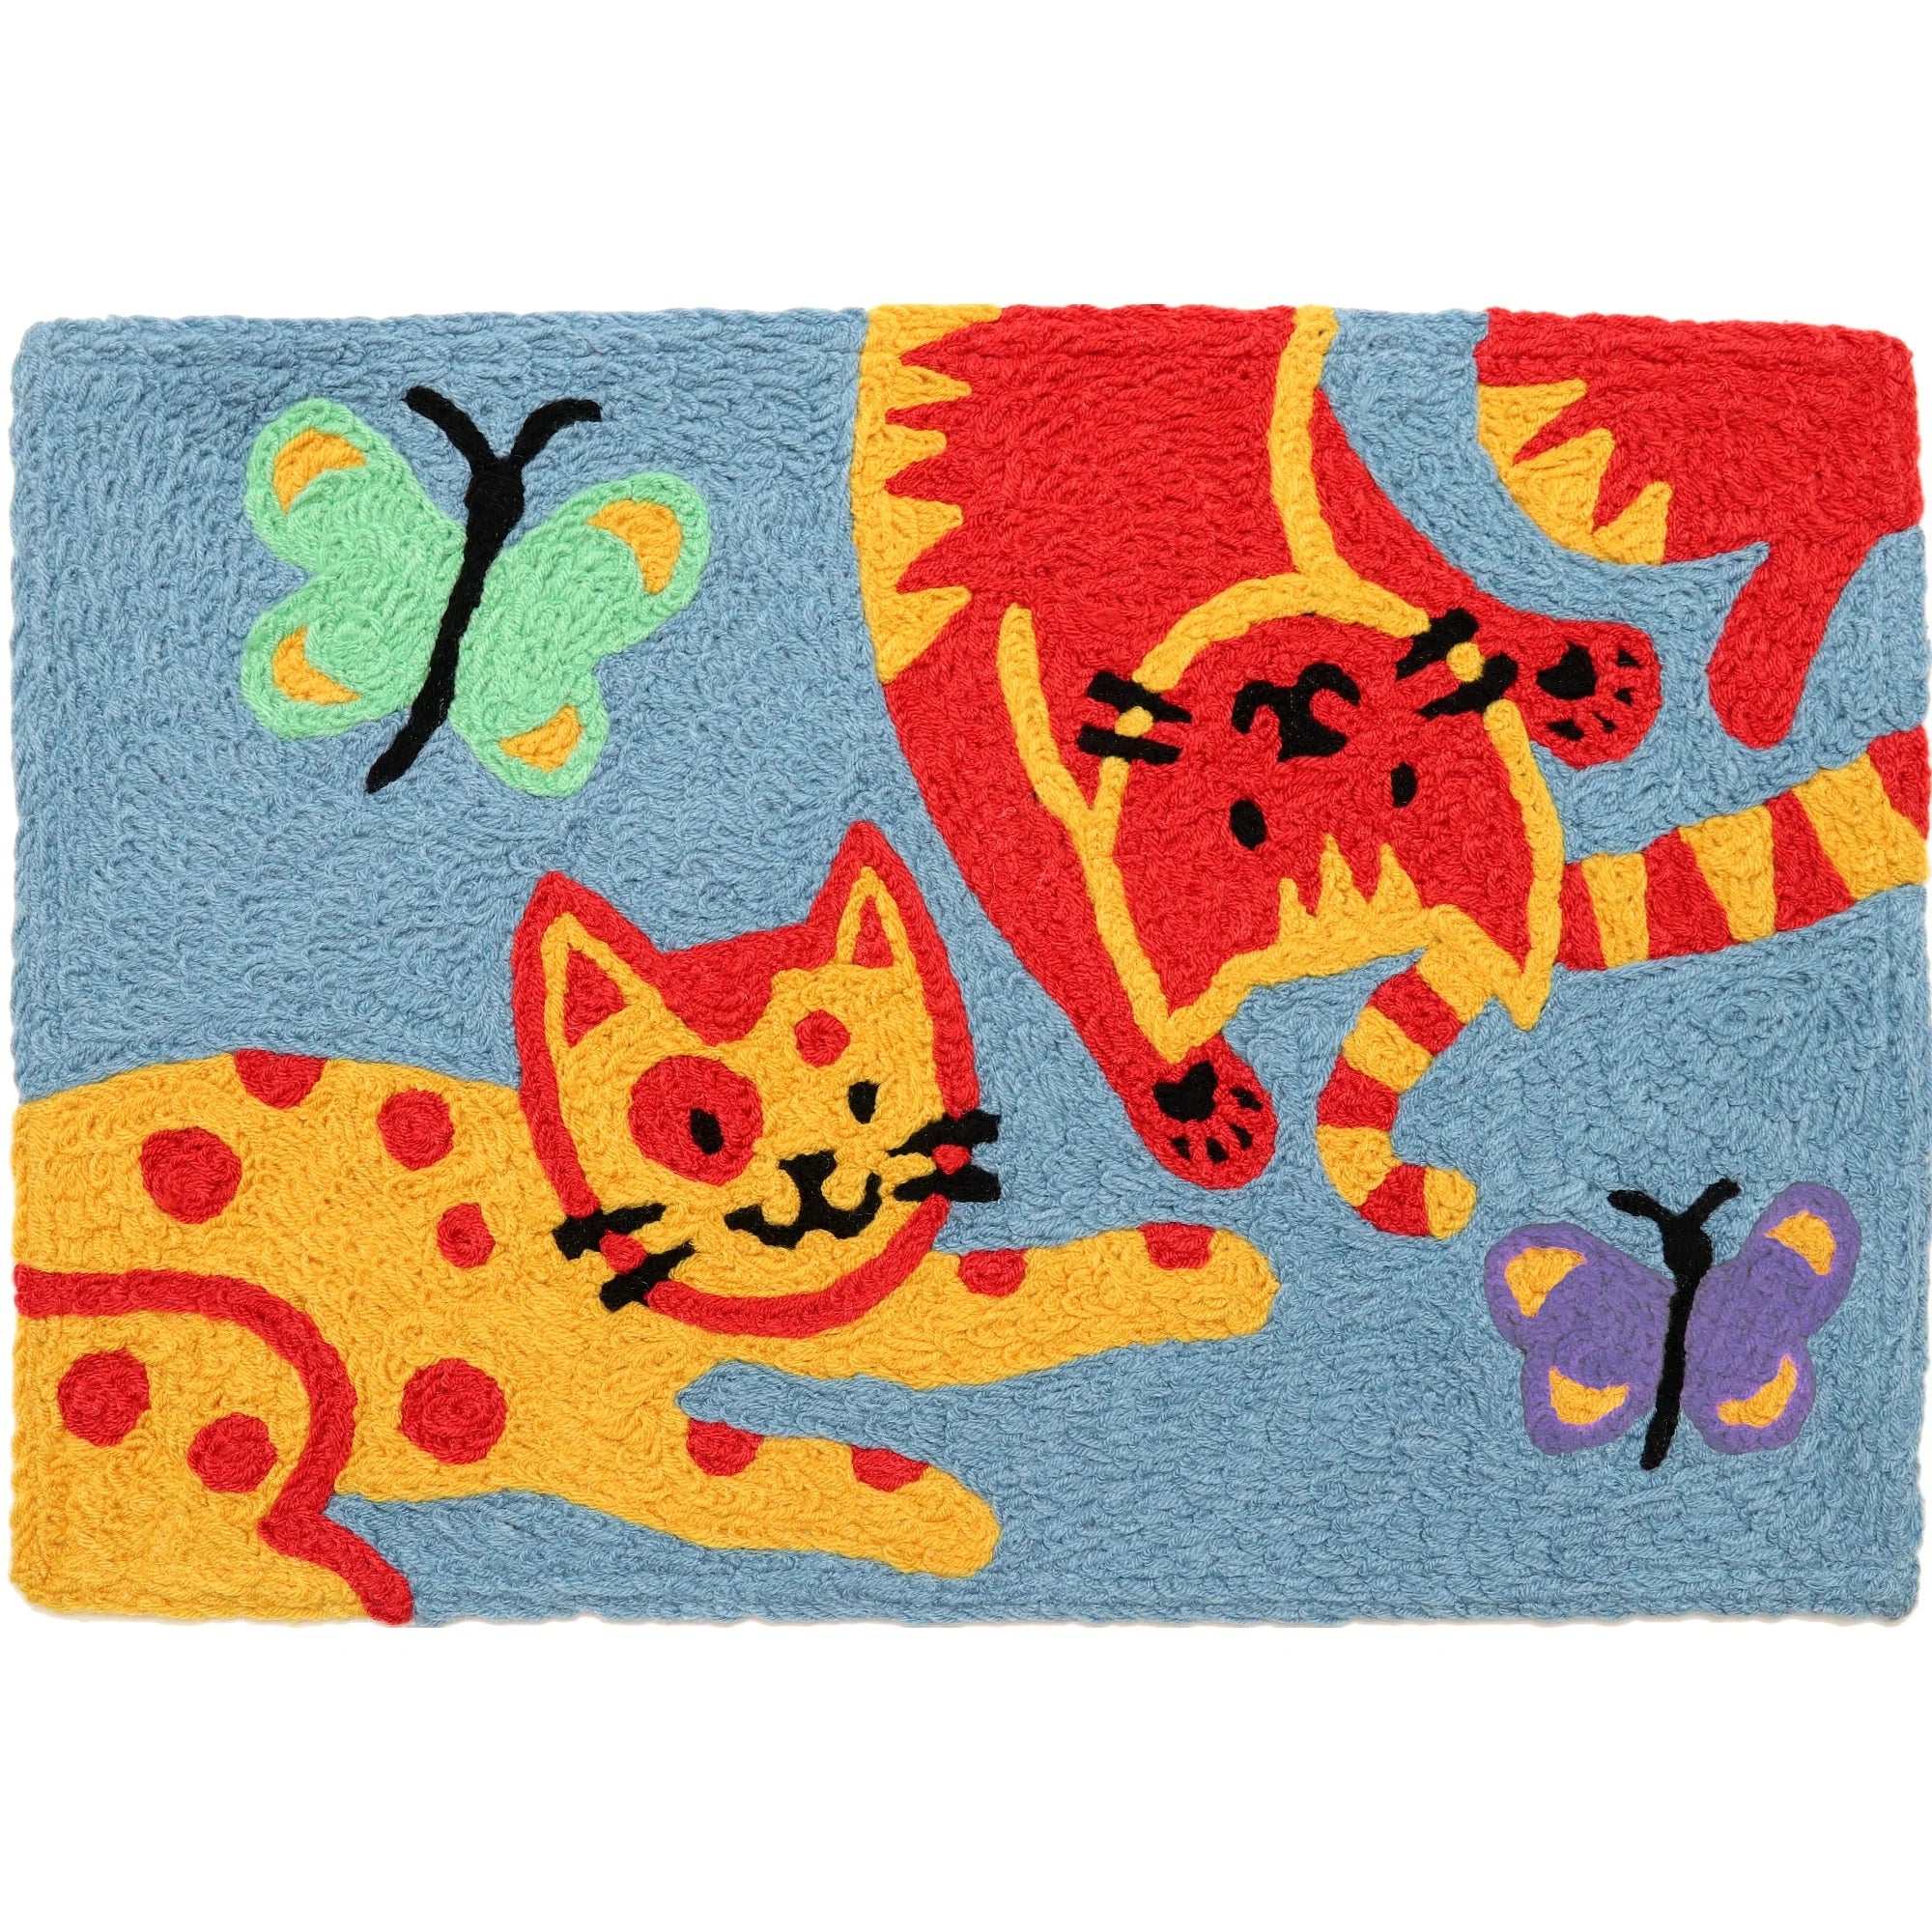 Jellybean Kitties and Butterflies 20"x30" Washable Accent Rug